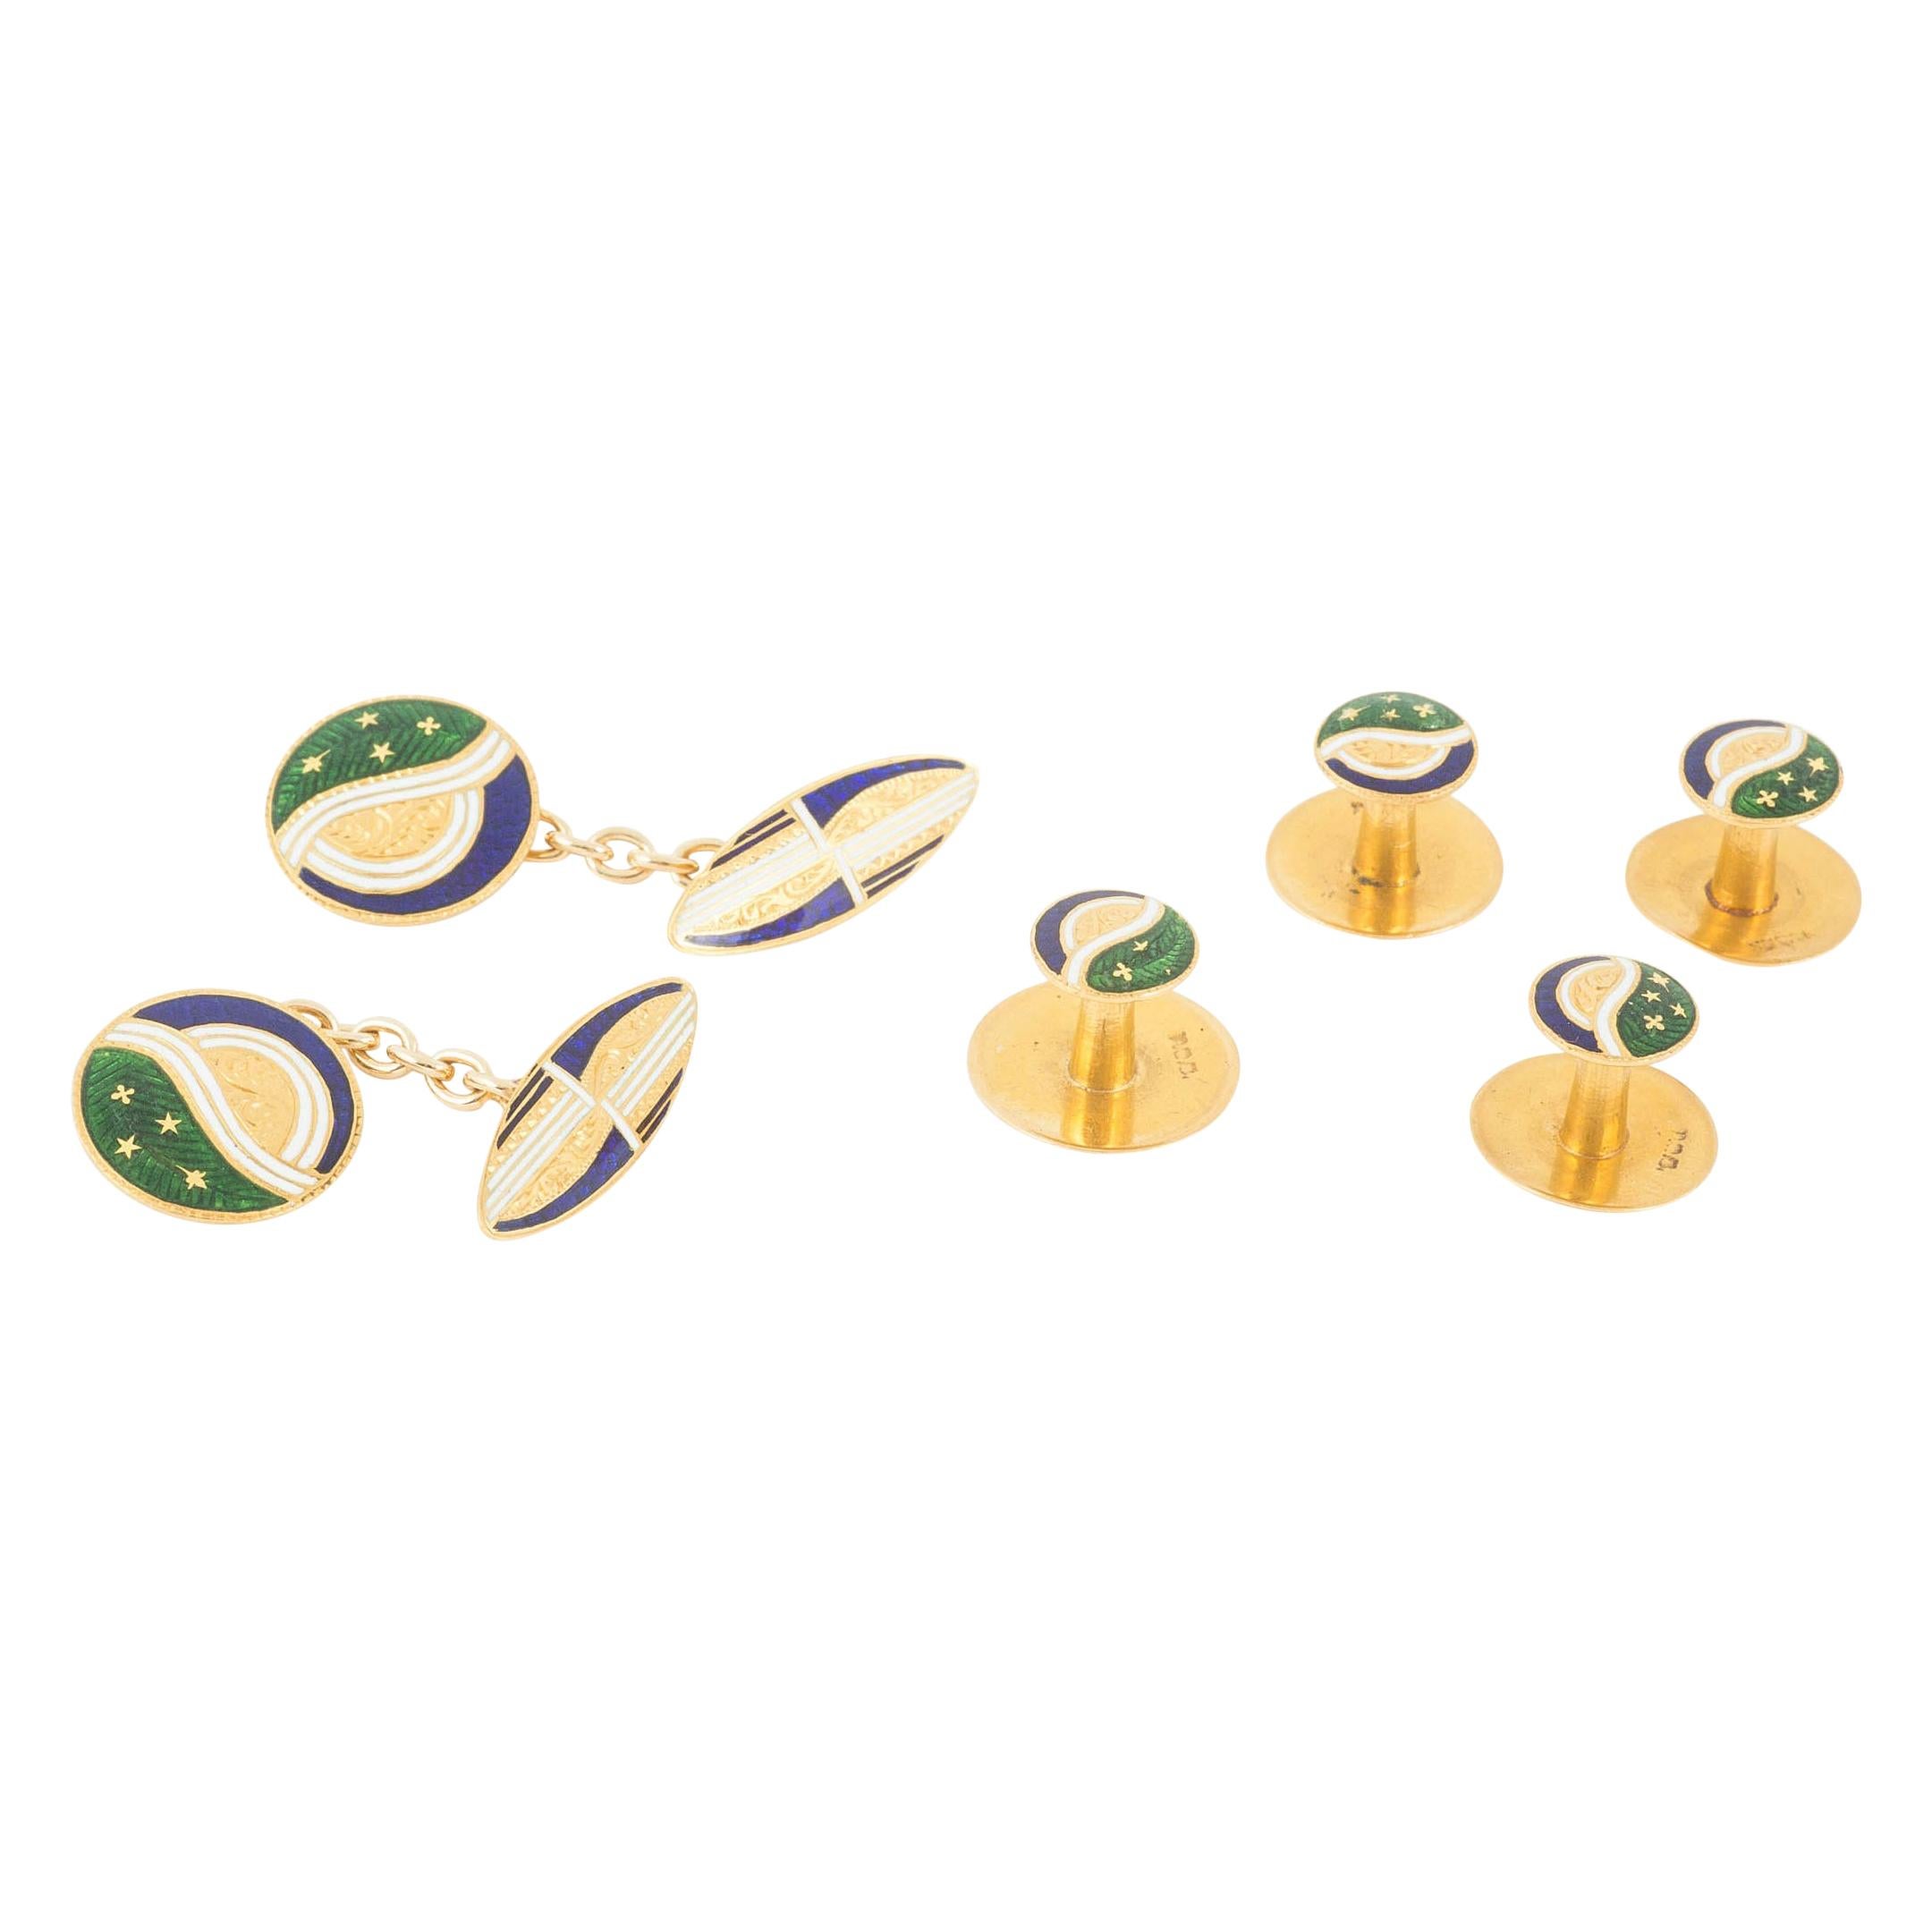 Cufflinks and Four Buttons in Colored Enamel, and 14 Karat Gold, circa 1910